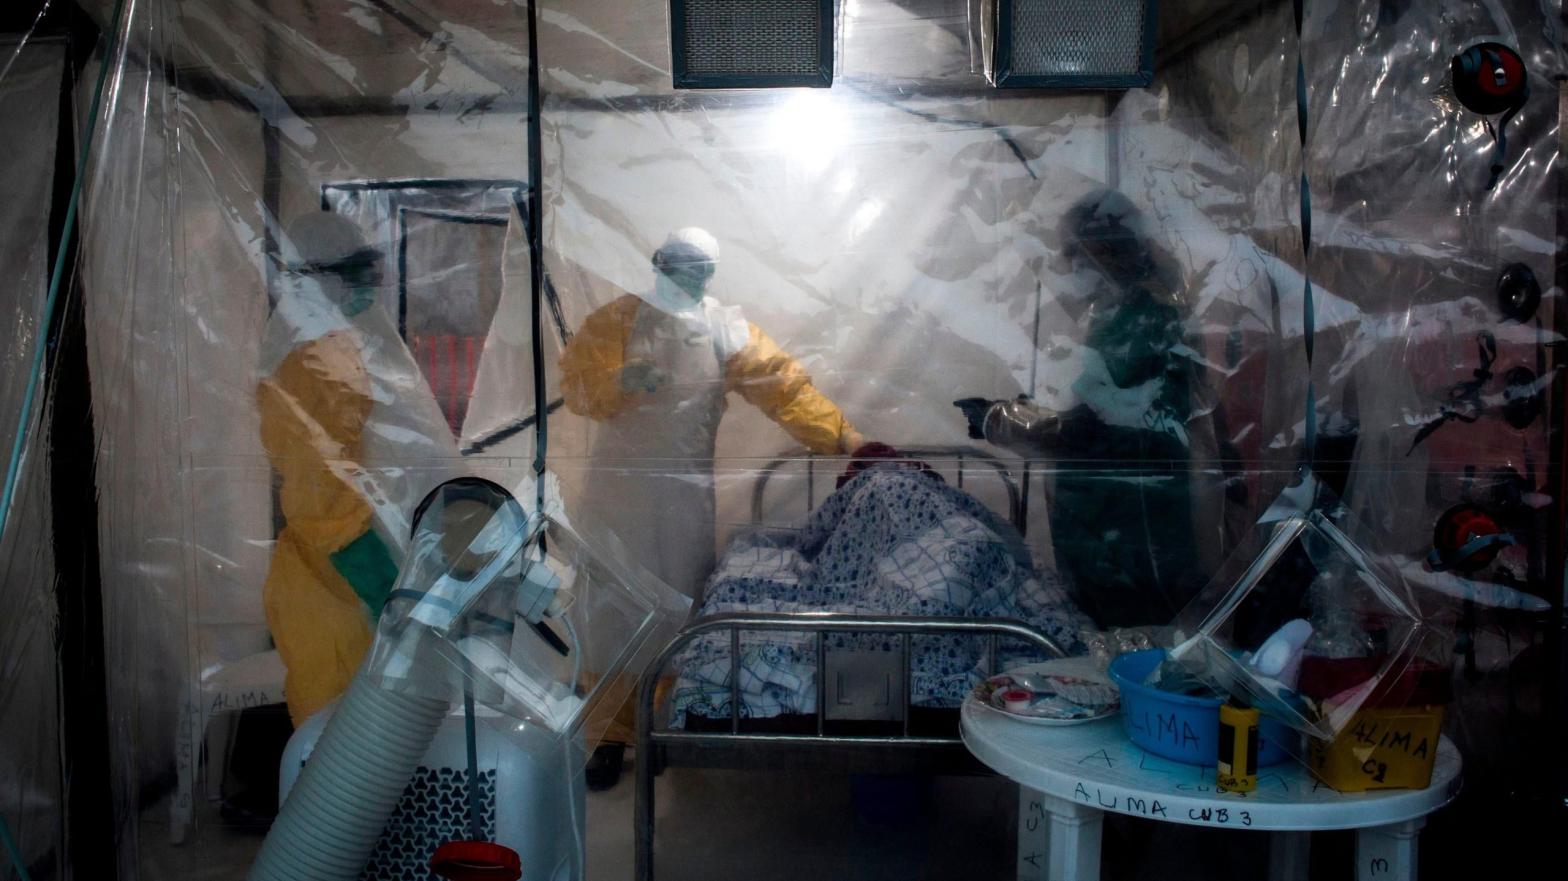 Medical workers check on an Ebola patient in a Biosecure Emergency Care Unit on August 15, 2018 in Beni. (Photo: John Wessels / AFP, Getty Images)